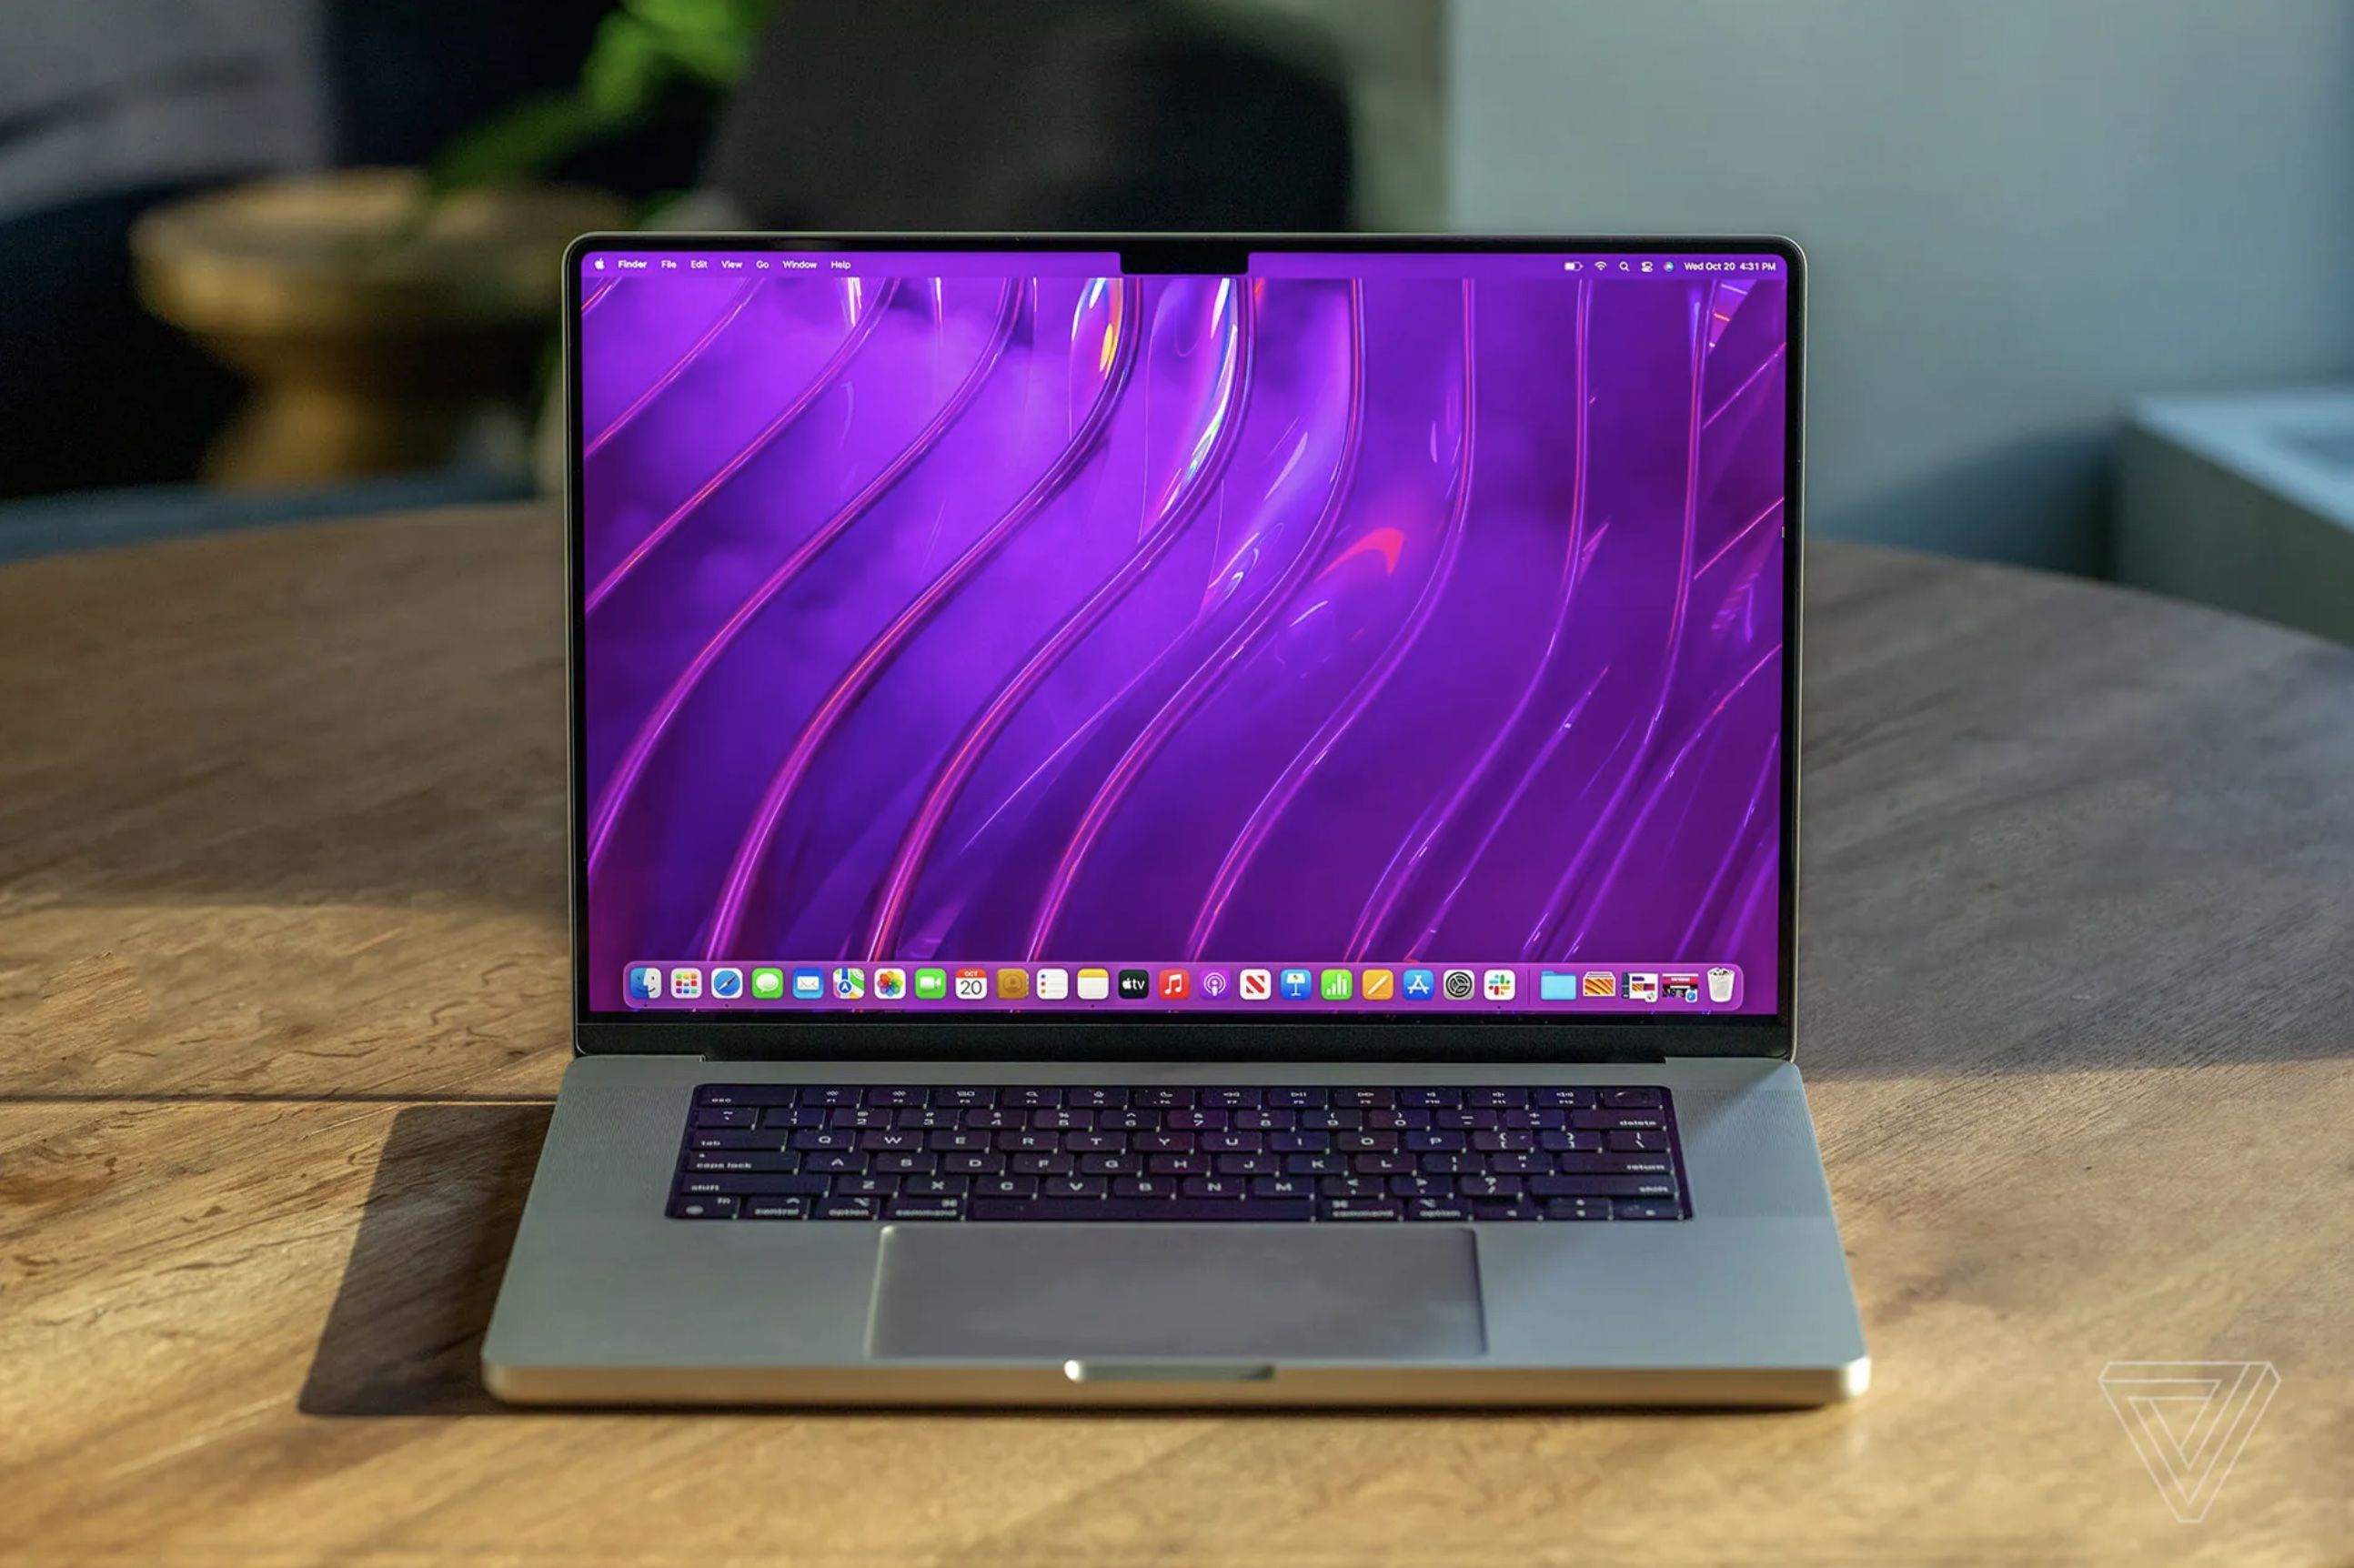 MacBook Pro Reviews: Fast Performance, Added Ports, and ProMotion Displays Check All the Boxes